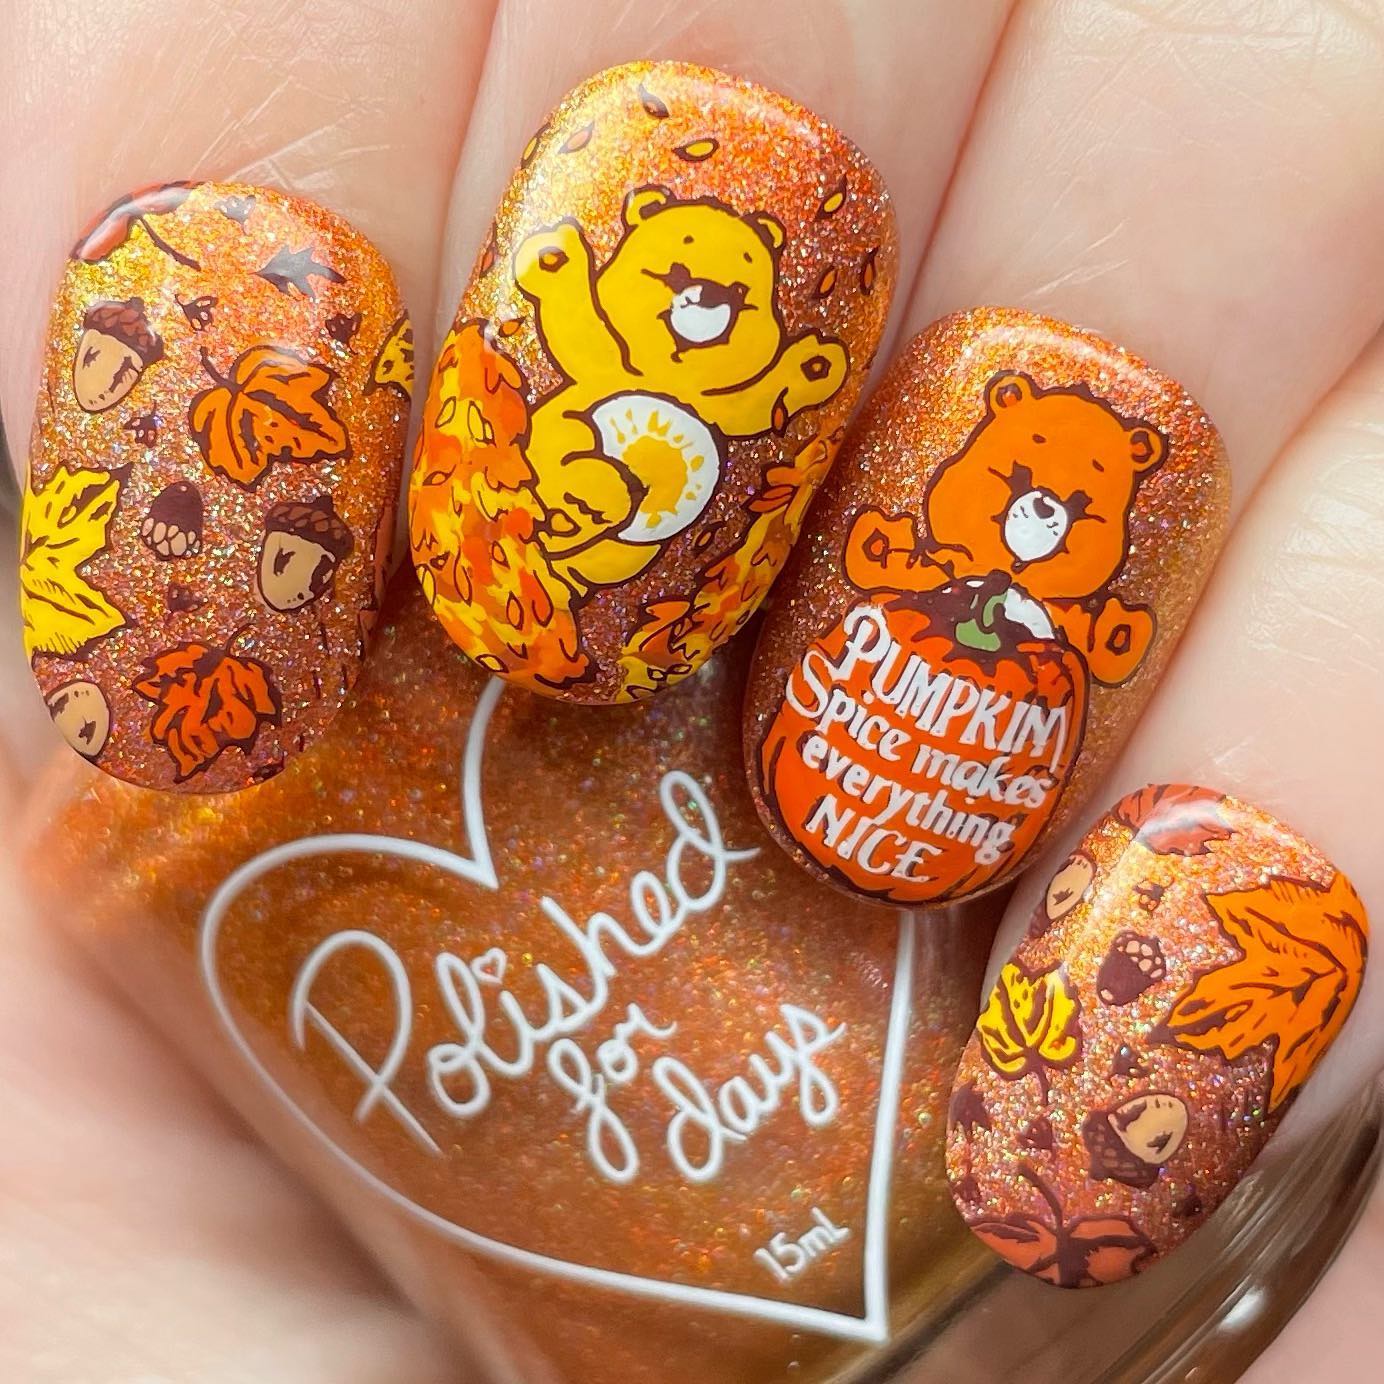 Are you a fan of teddy bears? Then, let's give the nail design above a shot. These cute teddy bears will make you smile and feel the autumn vibes with falling leaves. In addition, dark orange glitters are a great choice to have fun with your nails.